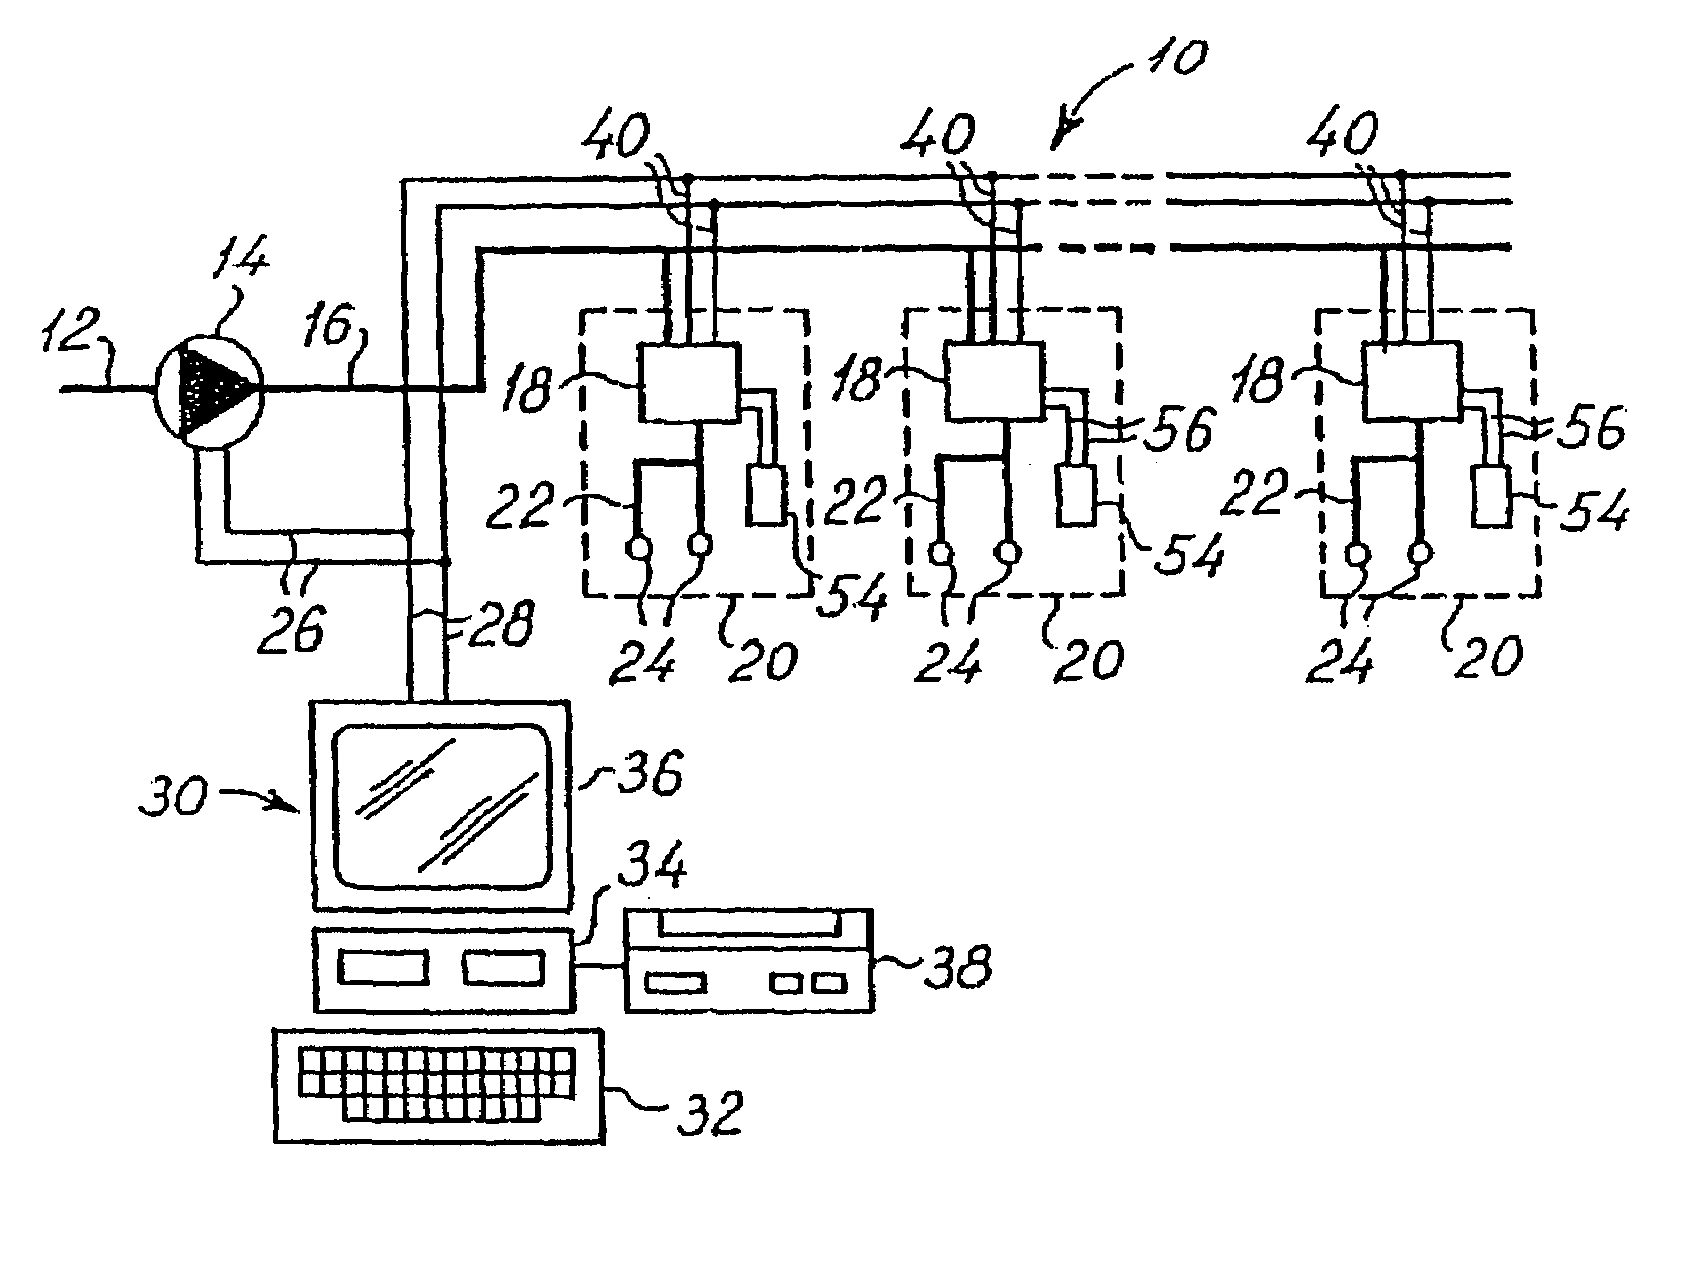 Two-wire controlling and monitoring system for the irrigation of localized areas of soil